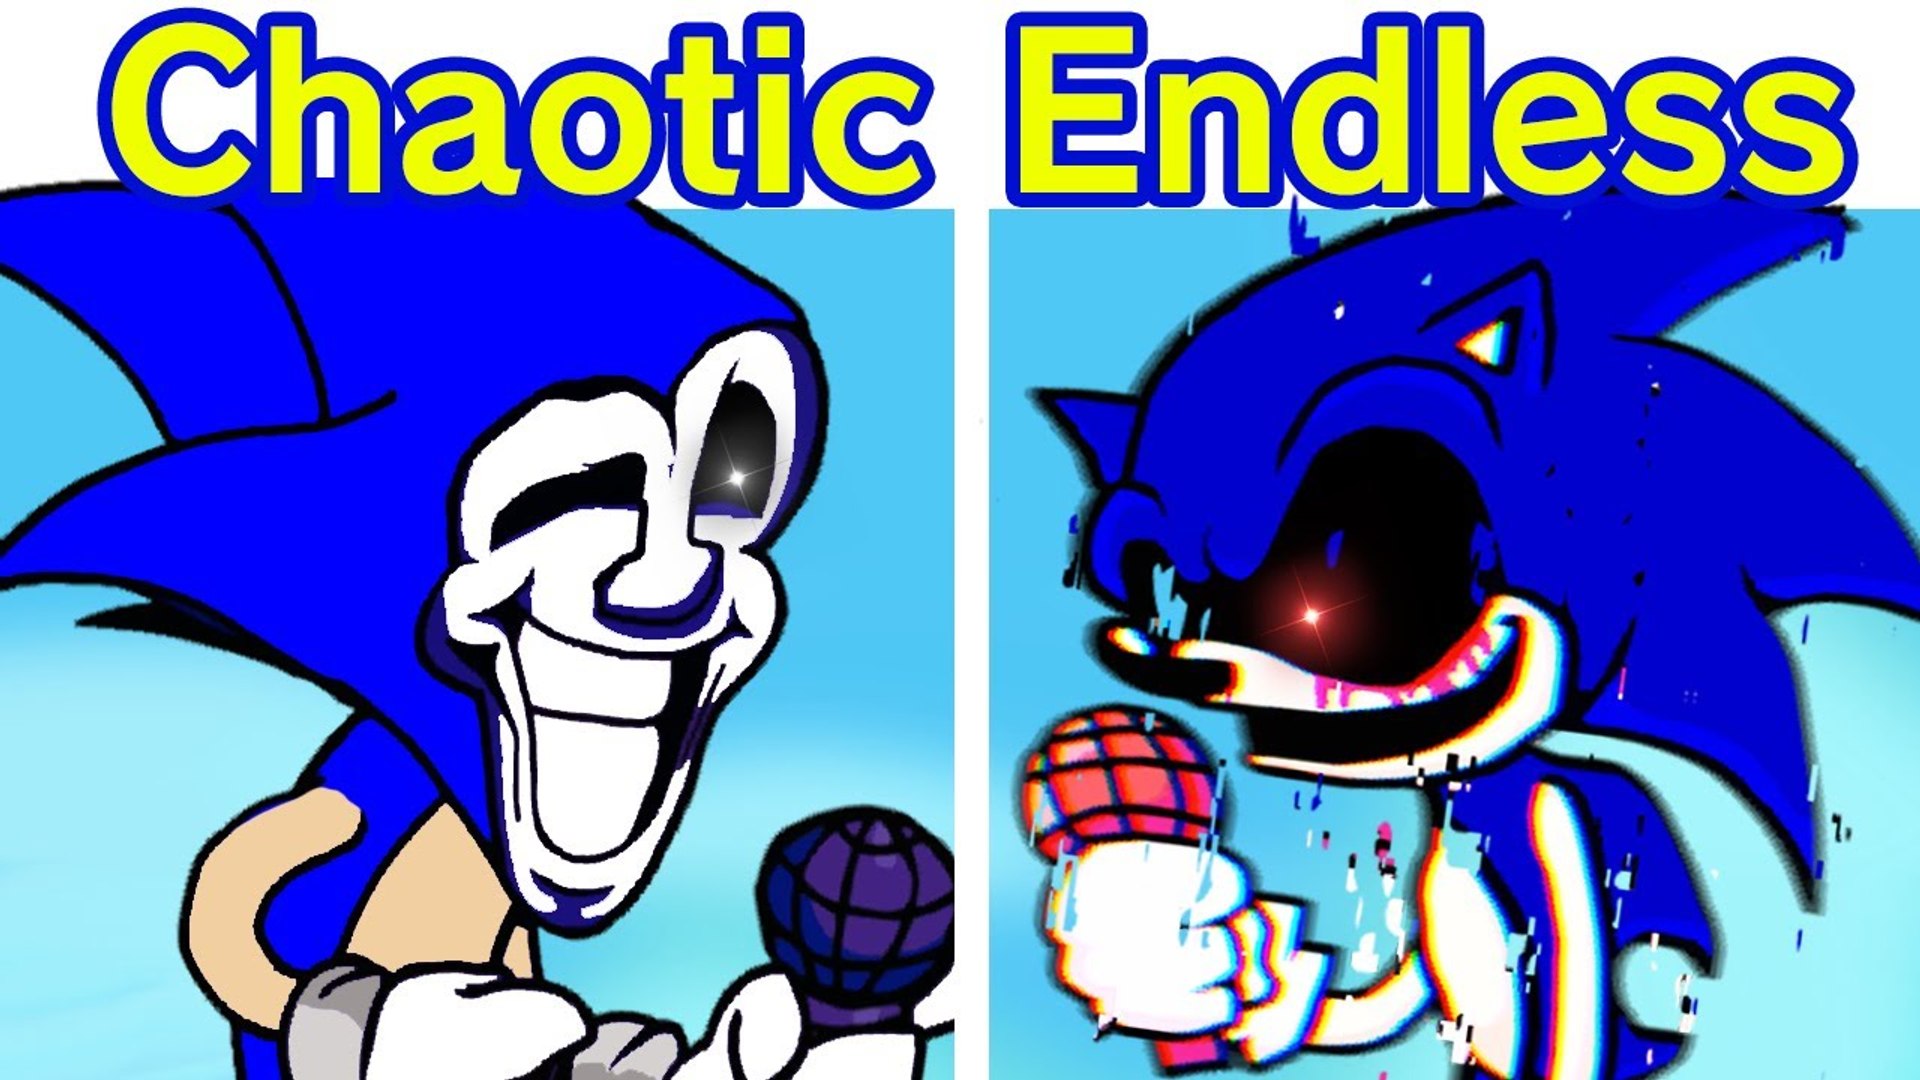 Post by Majin Sonic and Lord X in FNF CTP REMAKE BONUS EDITION